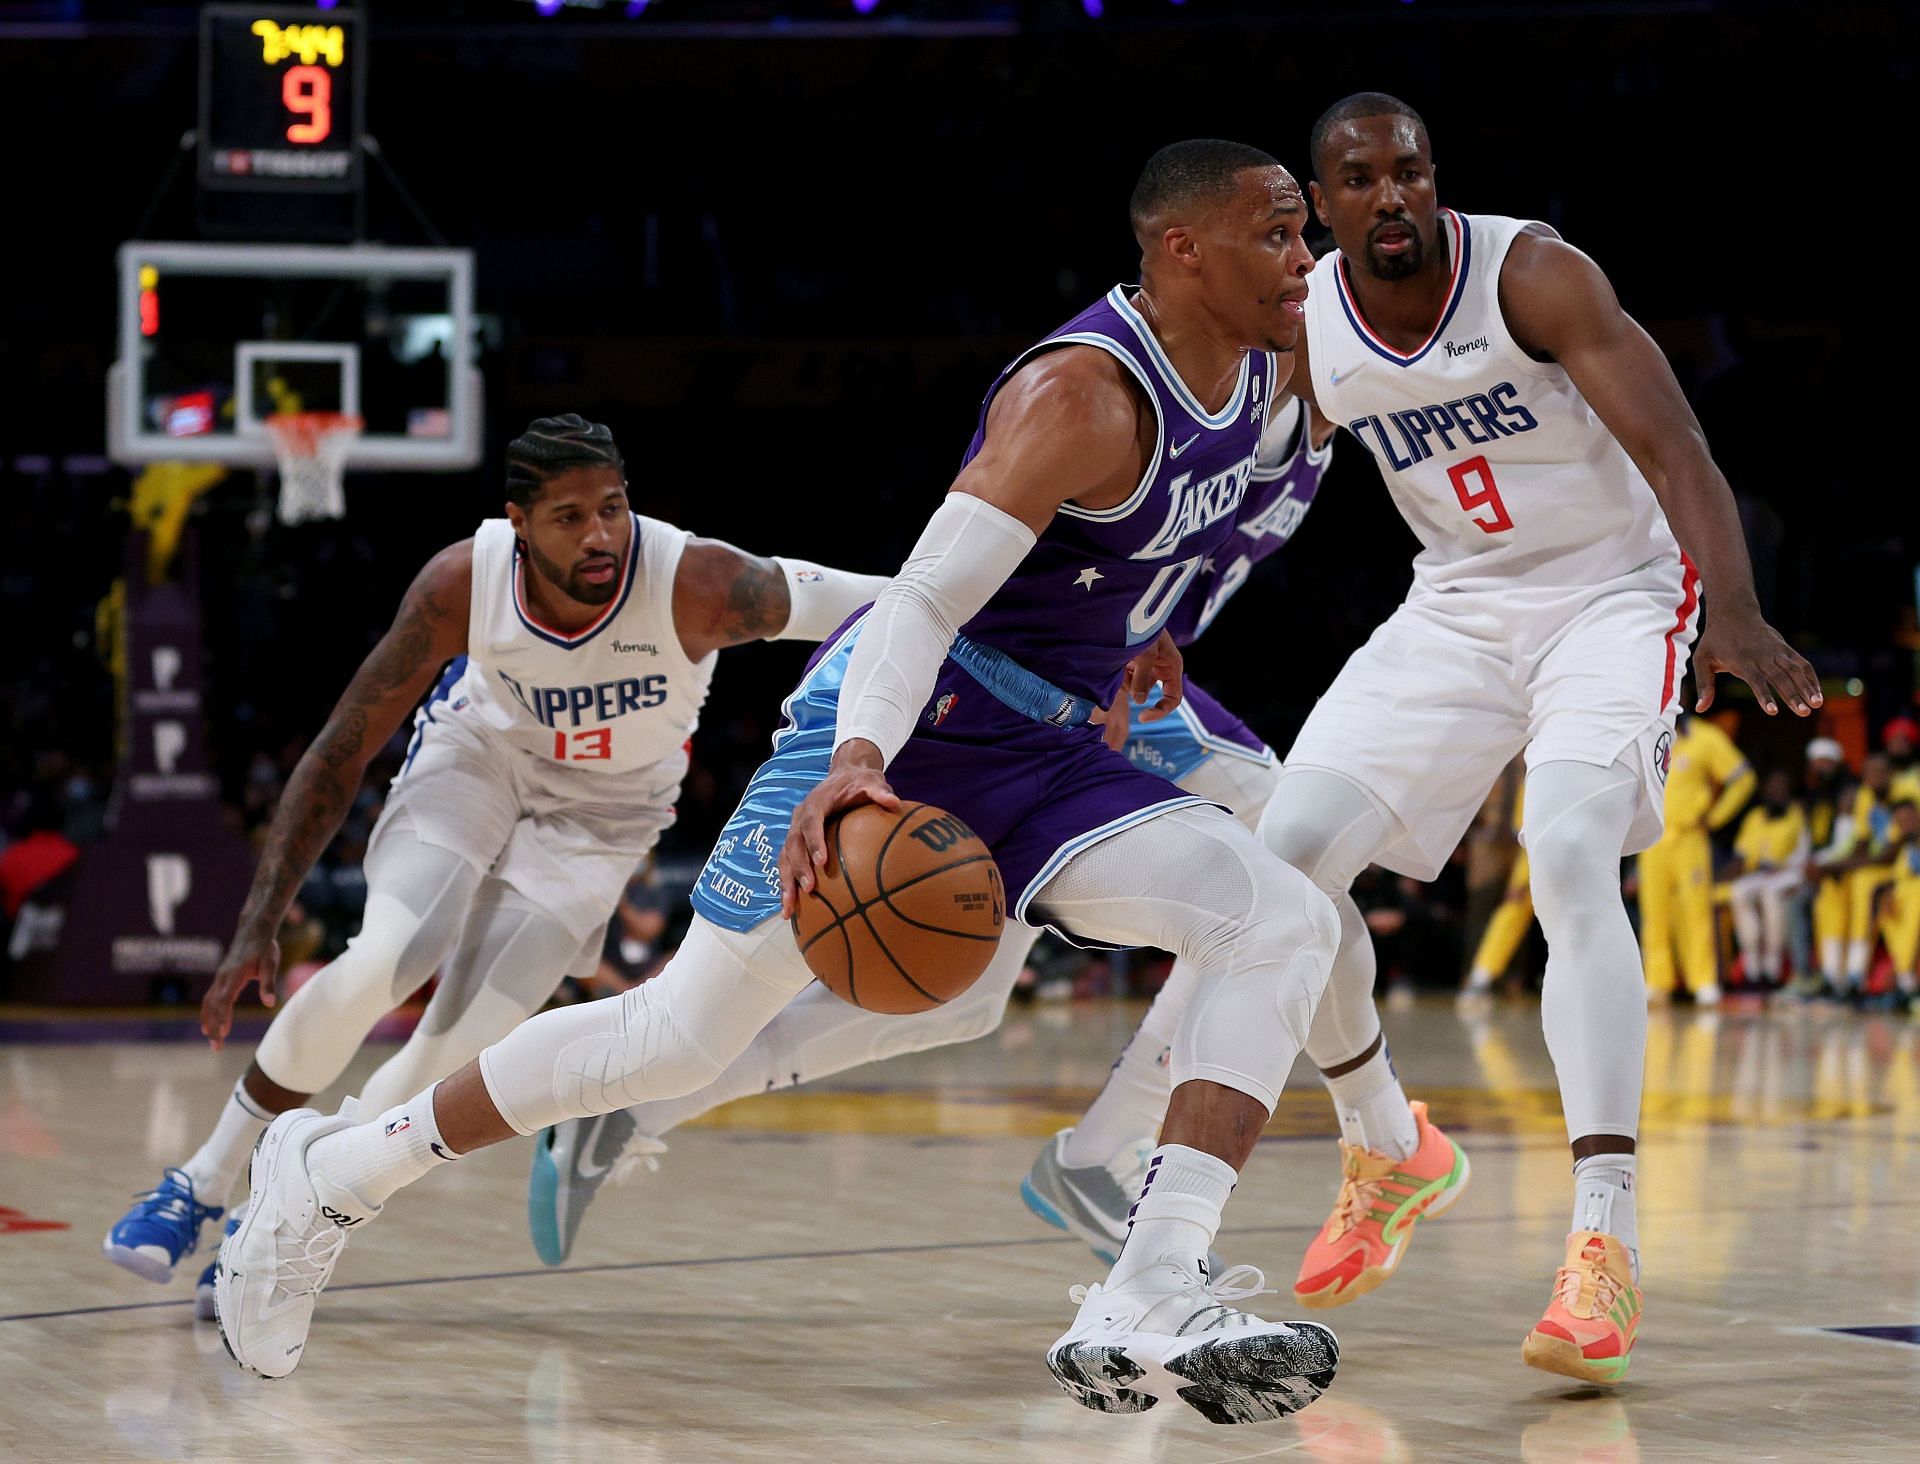 Russell Westbrook misses all 11 shots in loss to Clippers